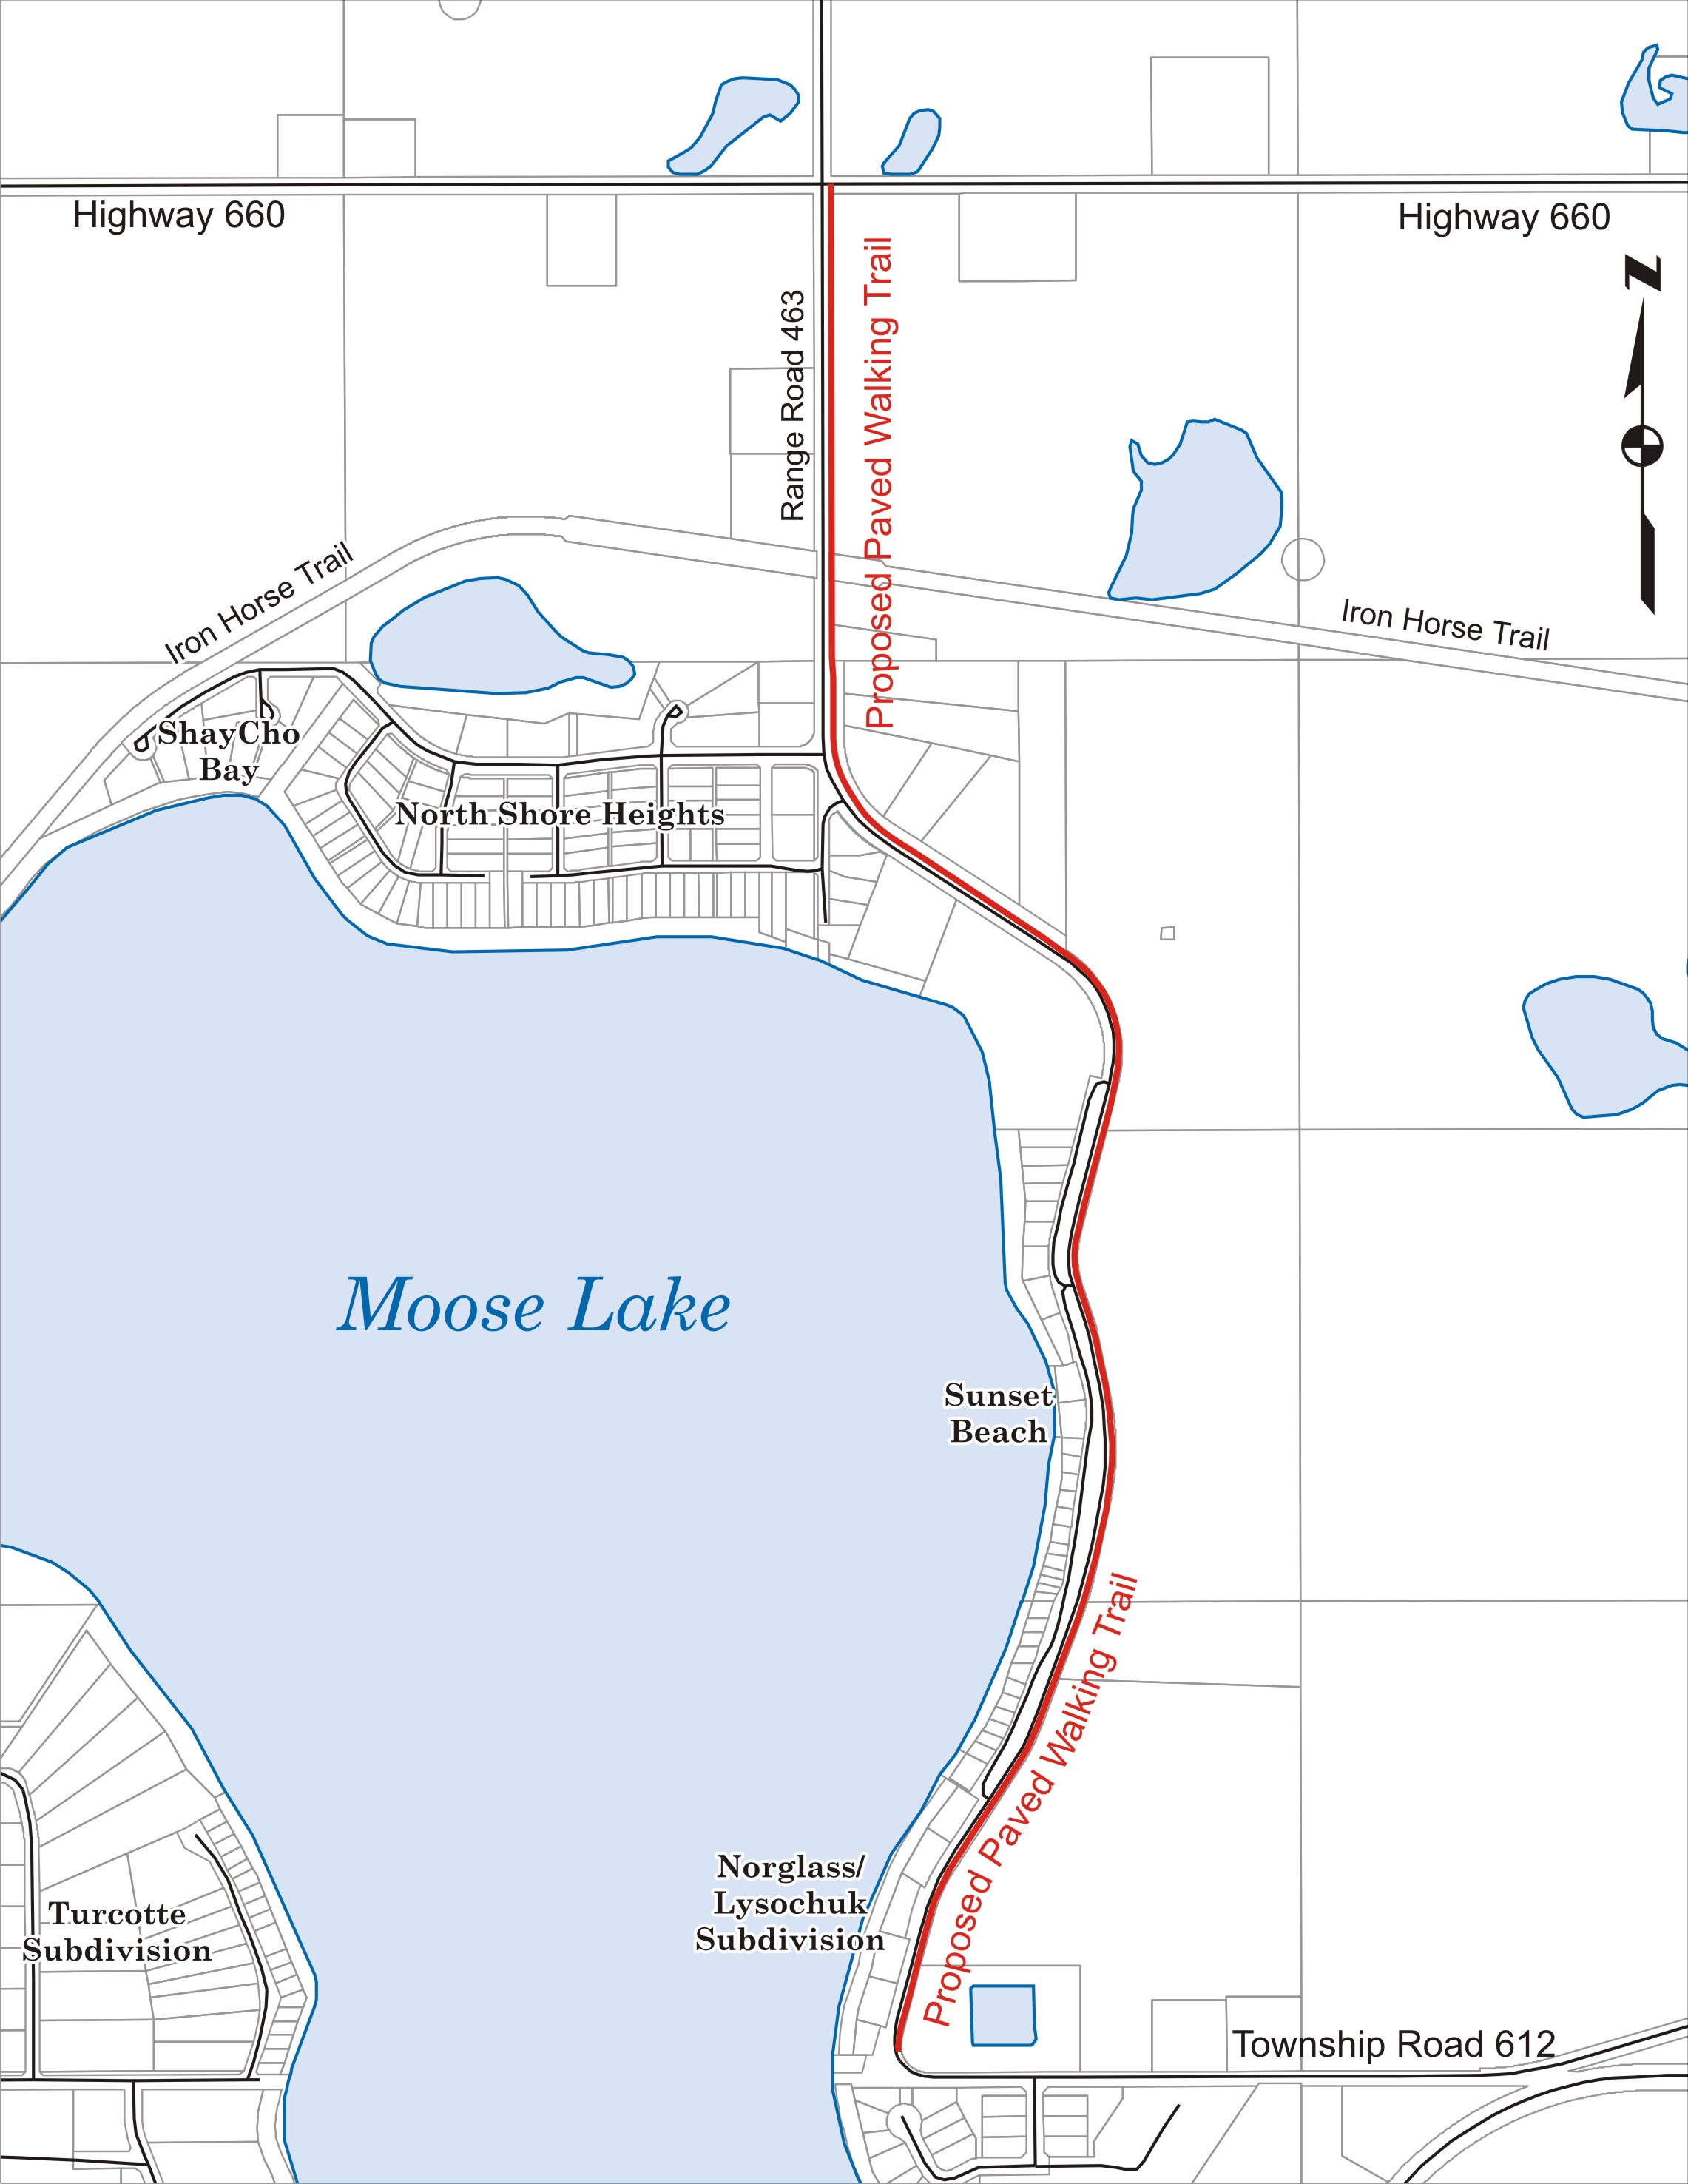 North%20Shore%20Heights%20Trail%20map.jpg